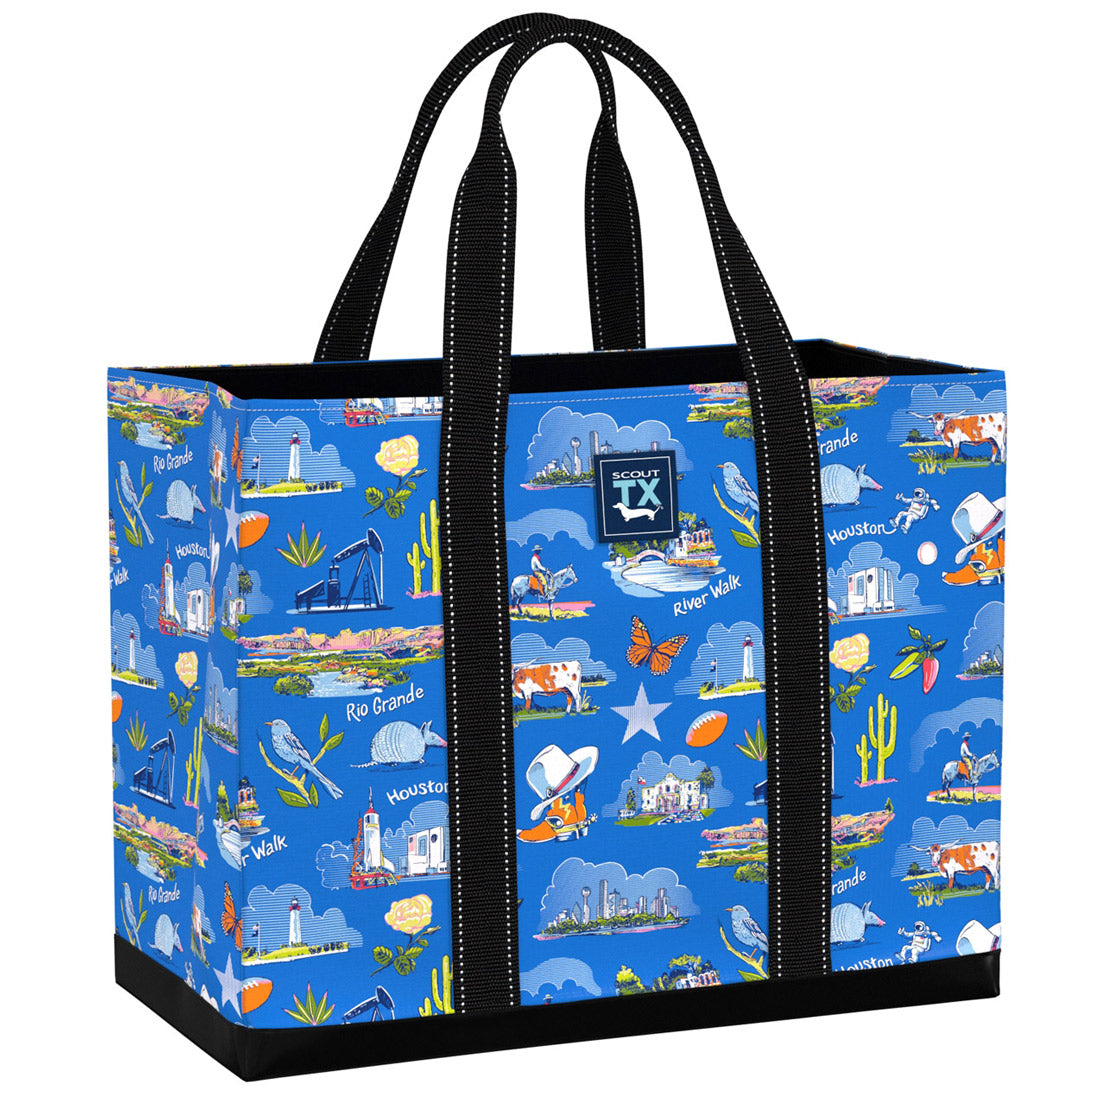 Best Beach Bag for Moms 10 Beach  Pool Bags for Function  Style